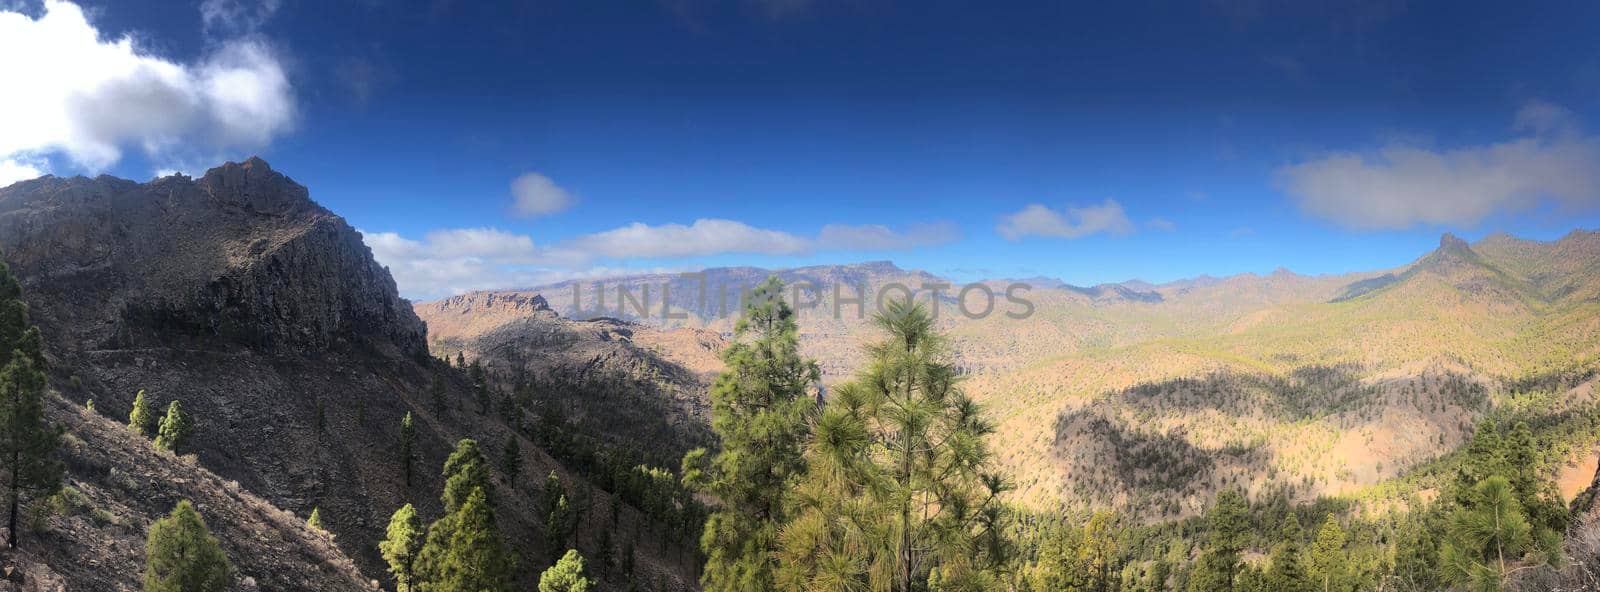 Panoramic scenery on Gran Canaria by traveltelly